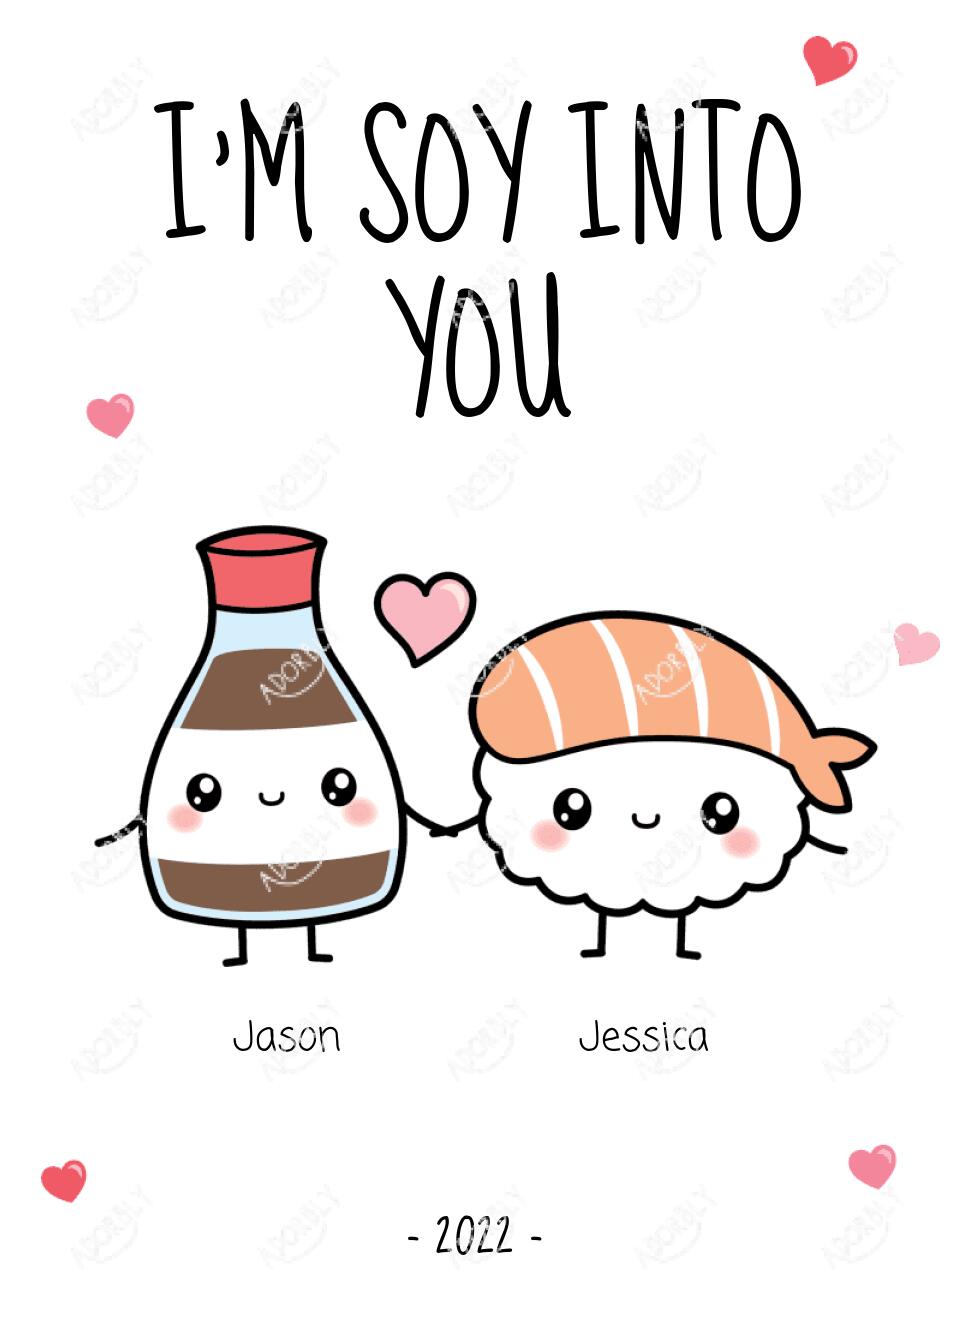 I'm Soy Into You - For All Couples - Personalized Card